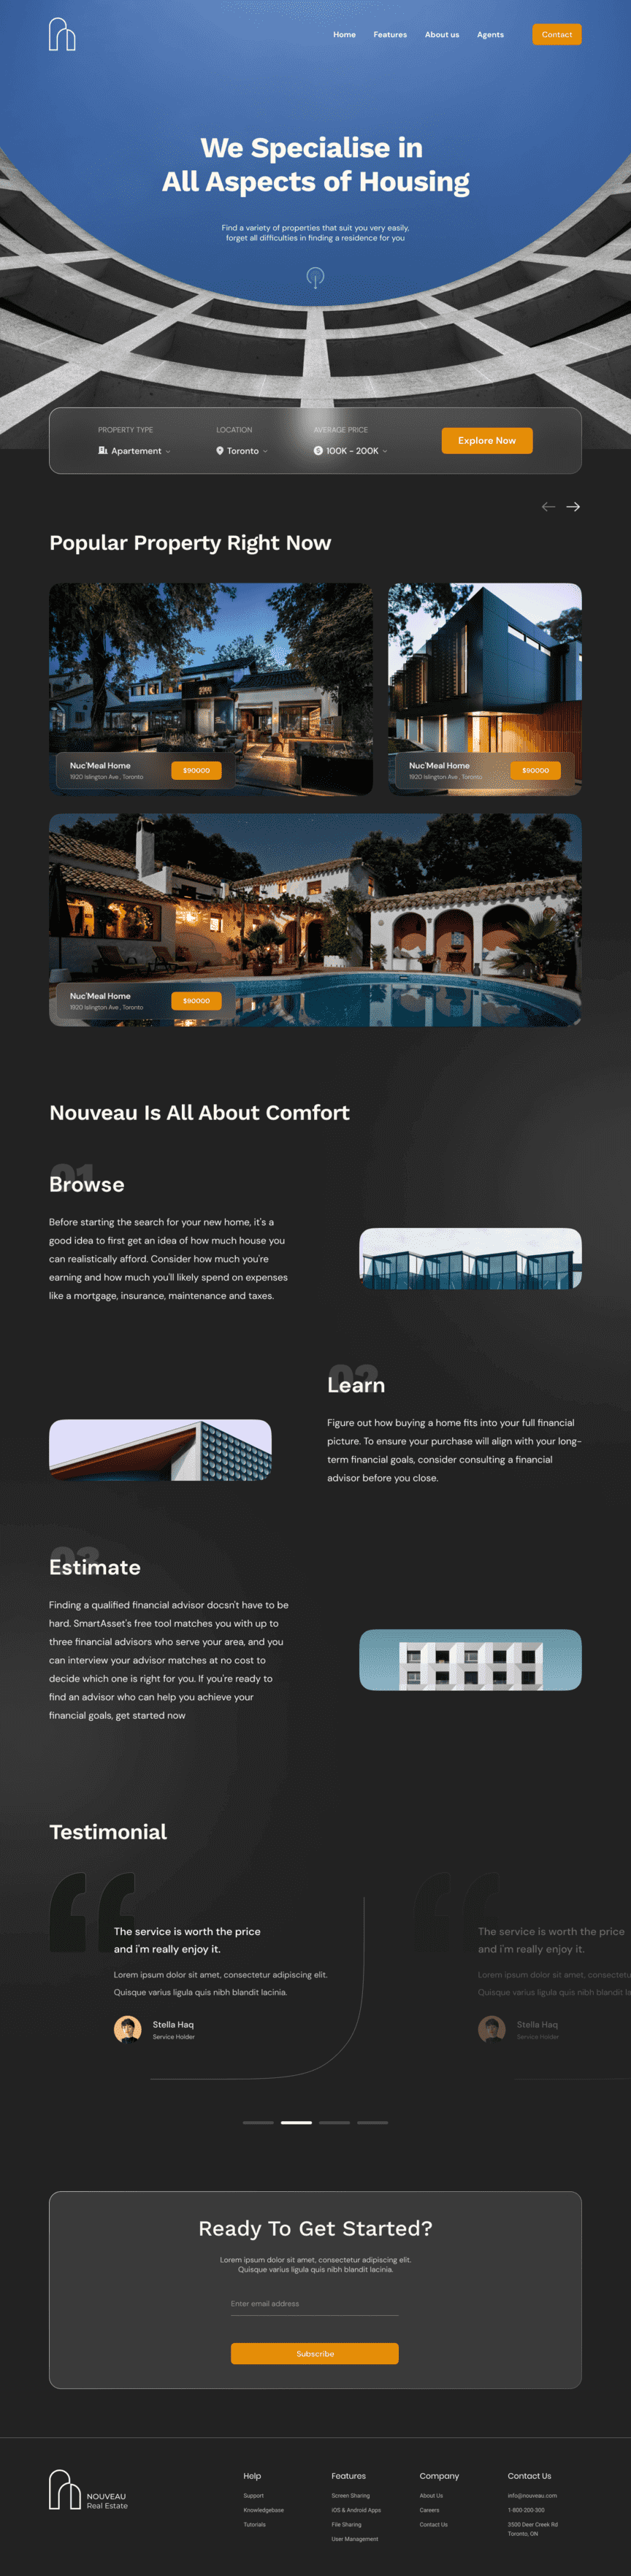 Brand Vision's Modern and Engaging Nouveau Website